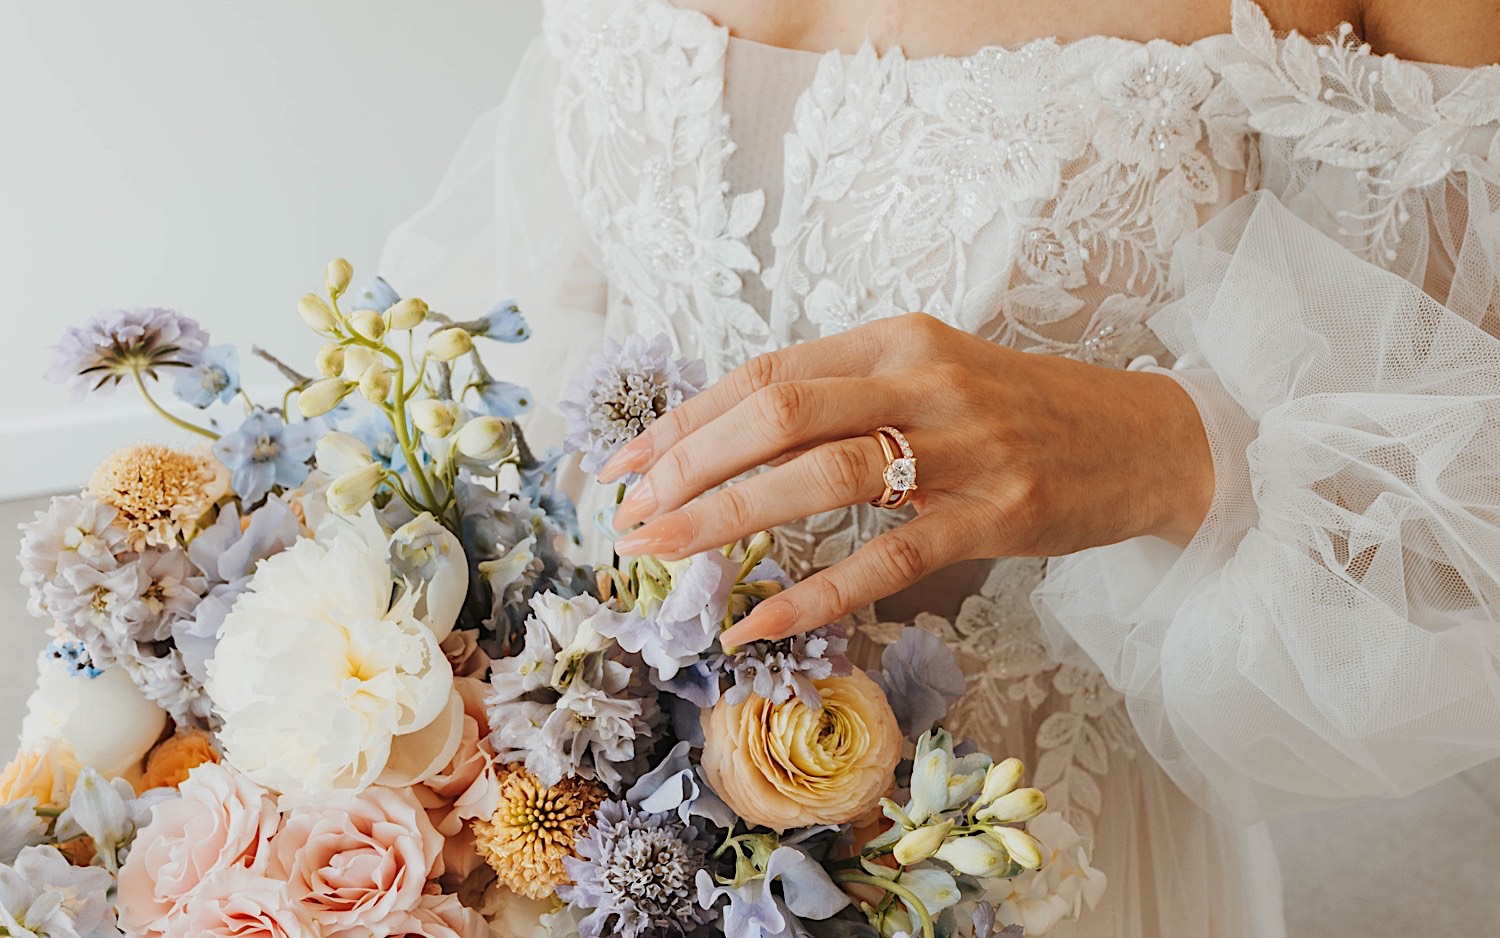 Close up photo of a bride's hand with her wedding ring on it touching her bouquet of flowers